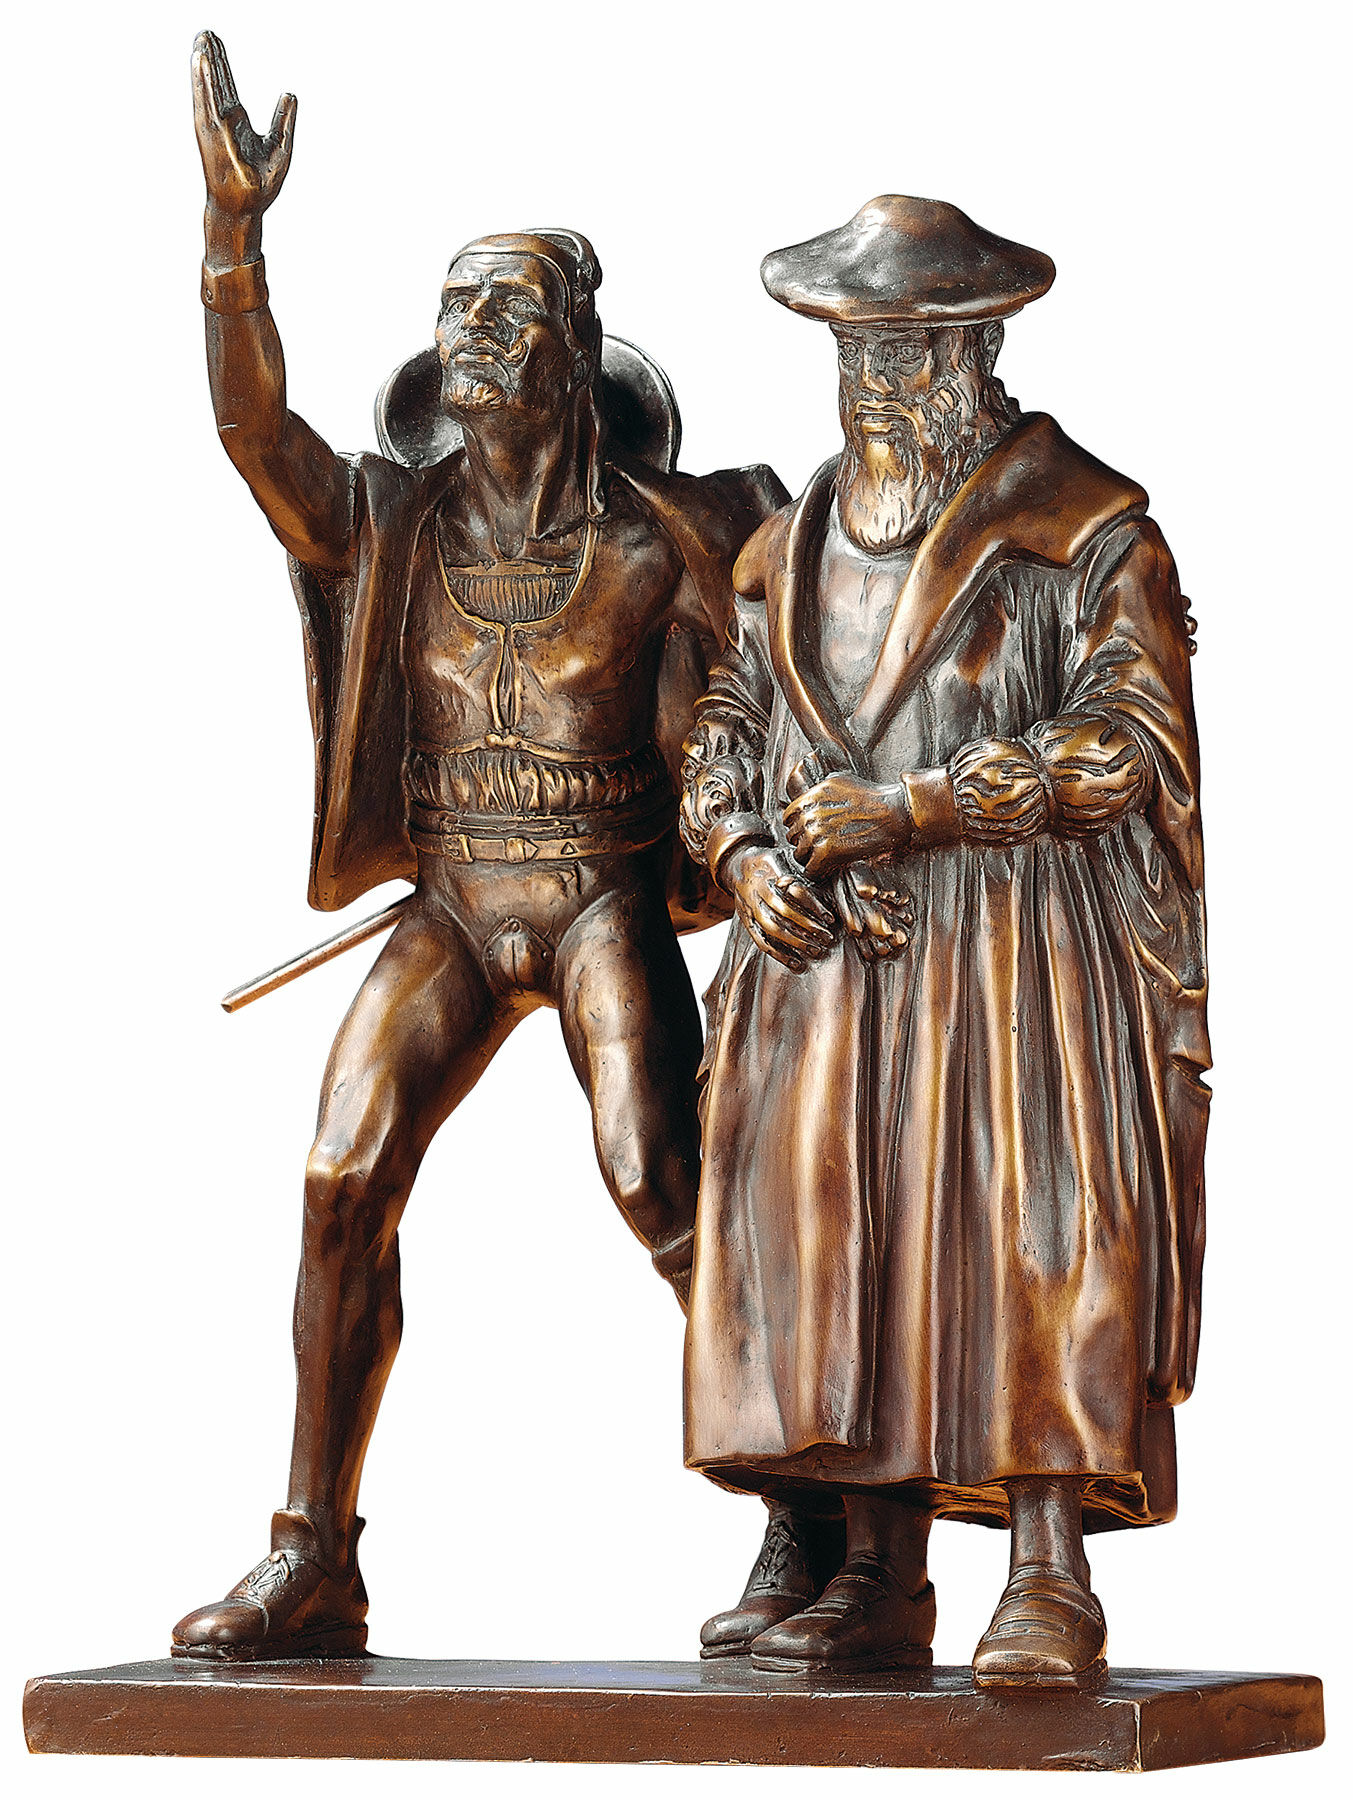 Sculptural group "Faust and Mephisto", bronze reduction by Mathieu Molitor